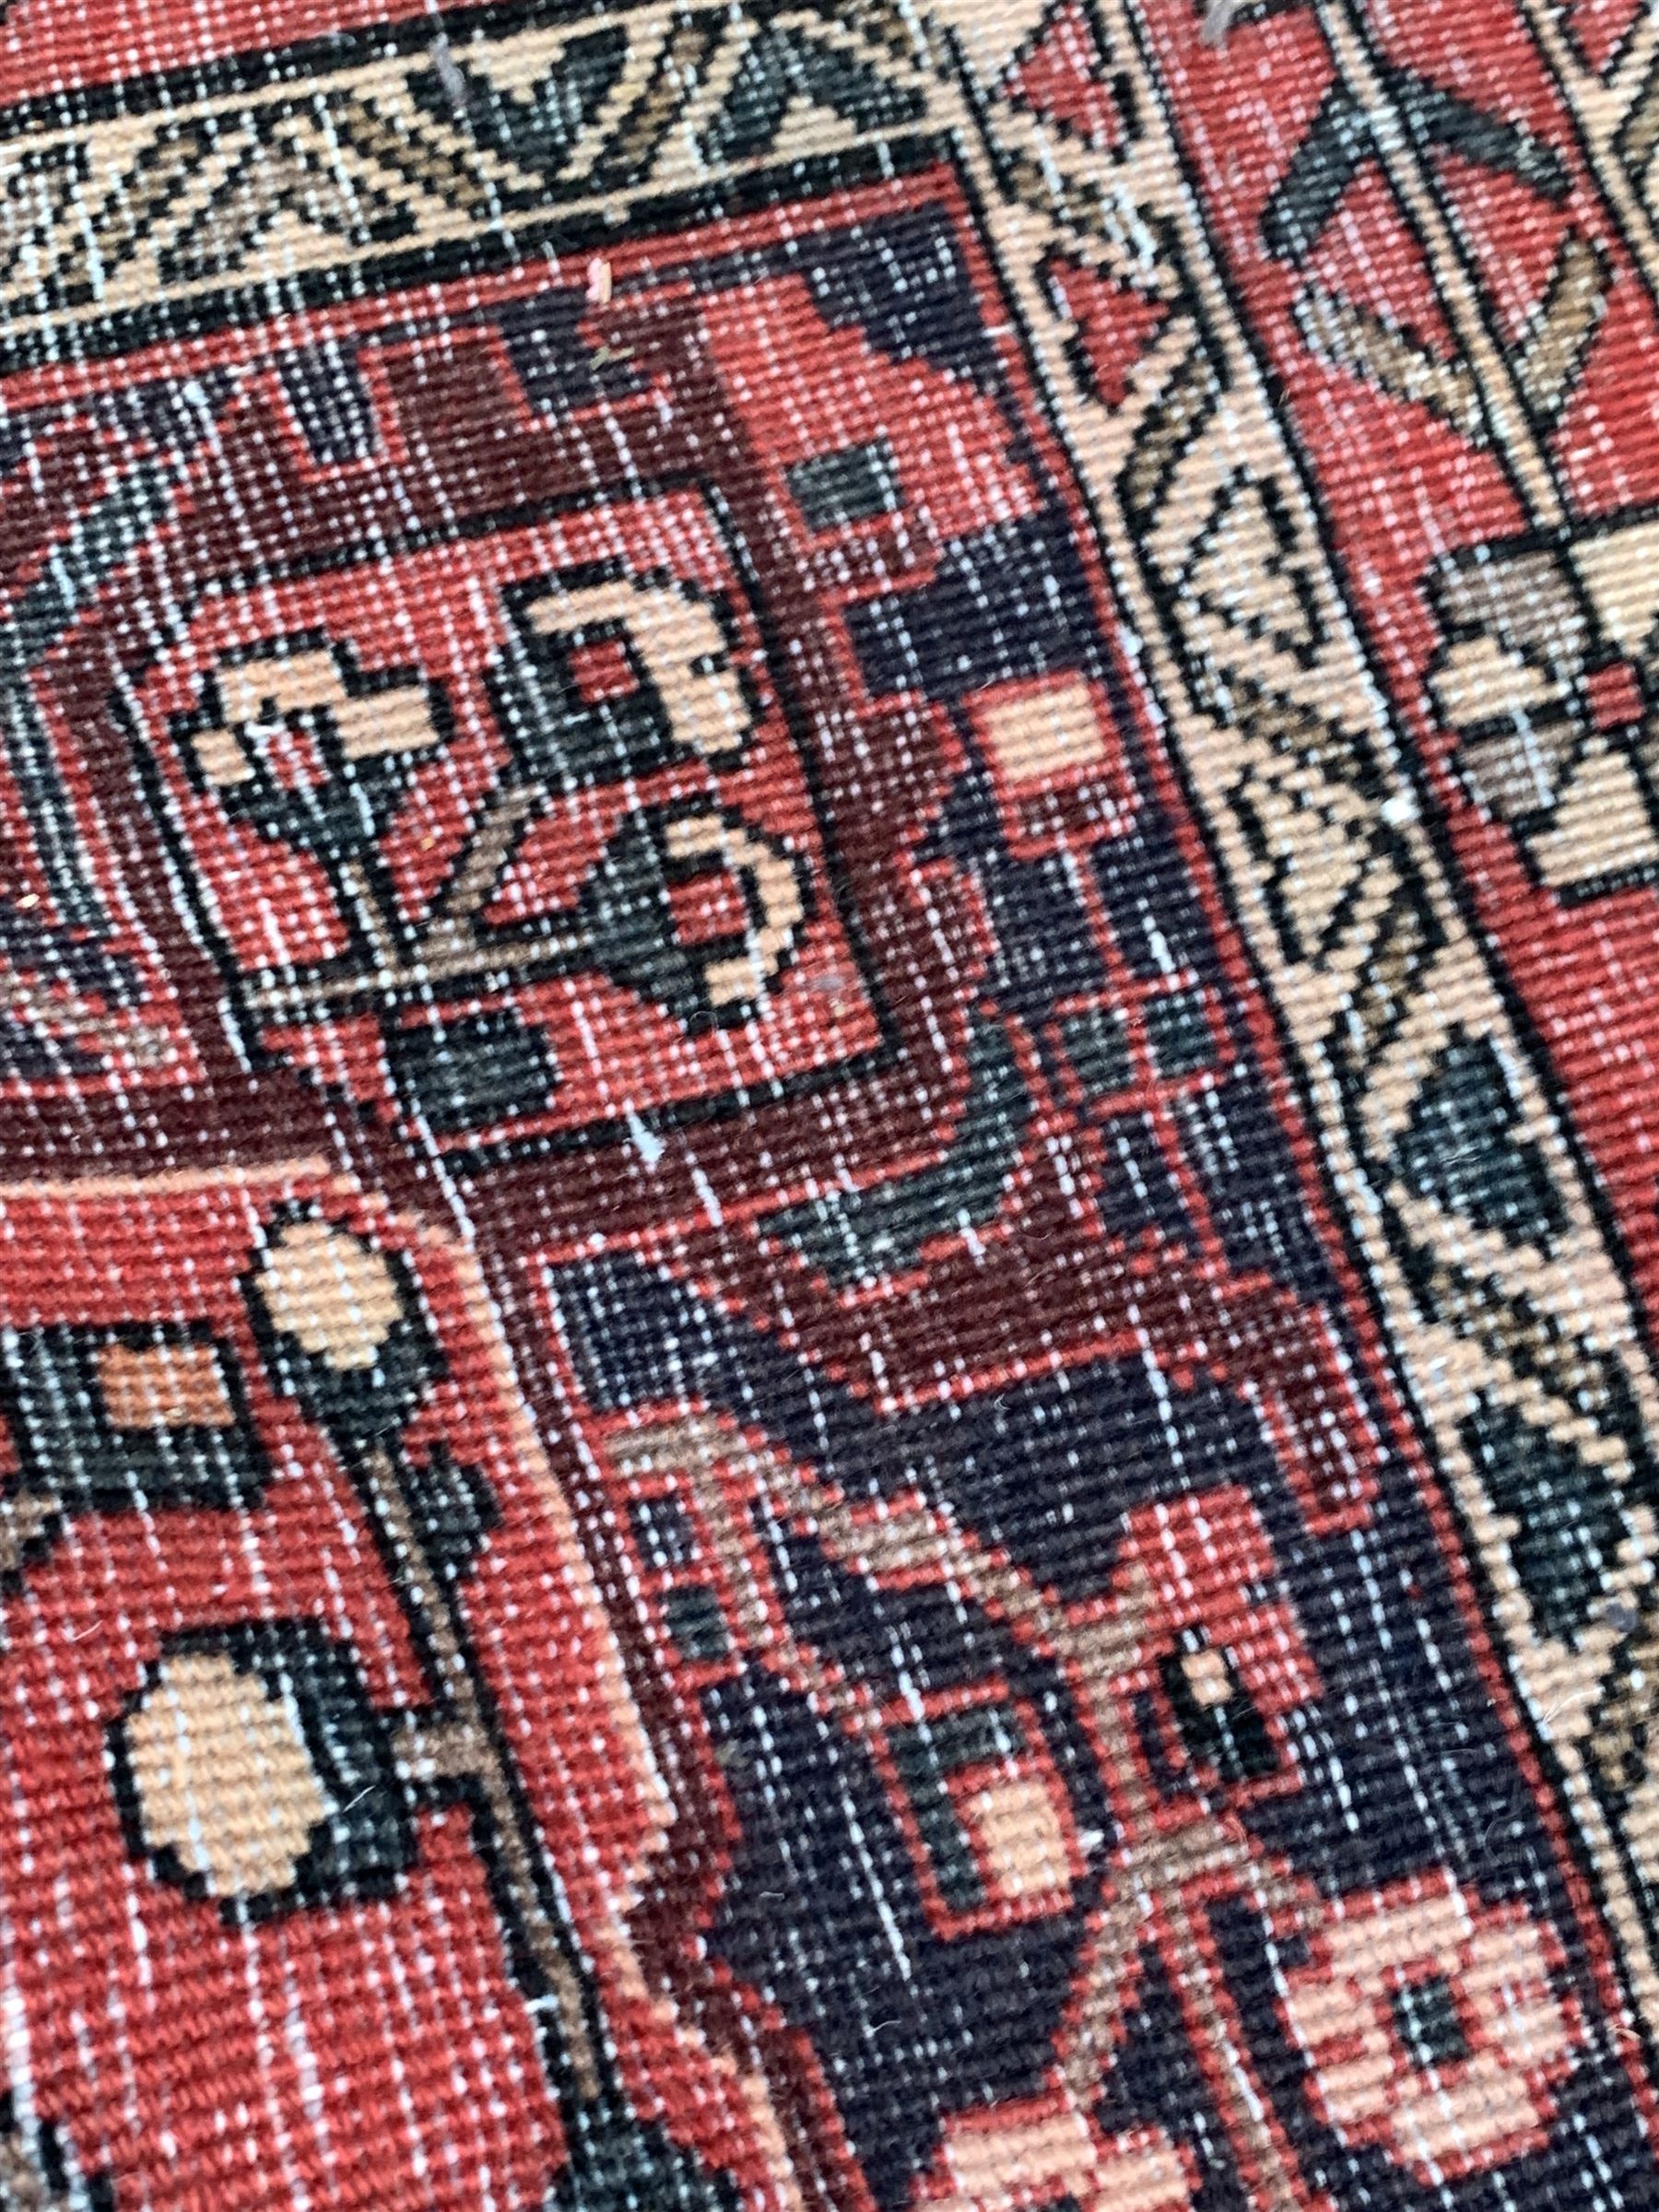 Vintage Persian faded red ground rug - Image 3 of 3